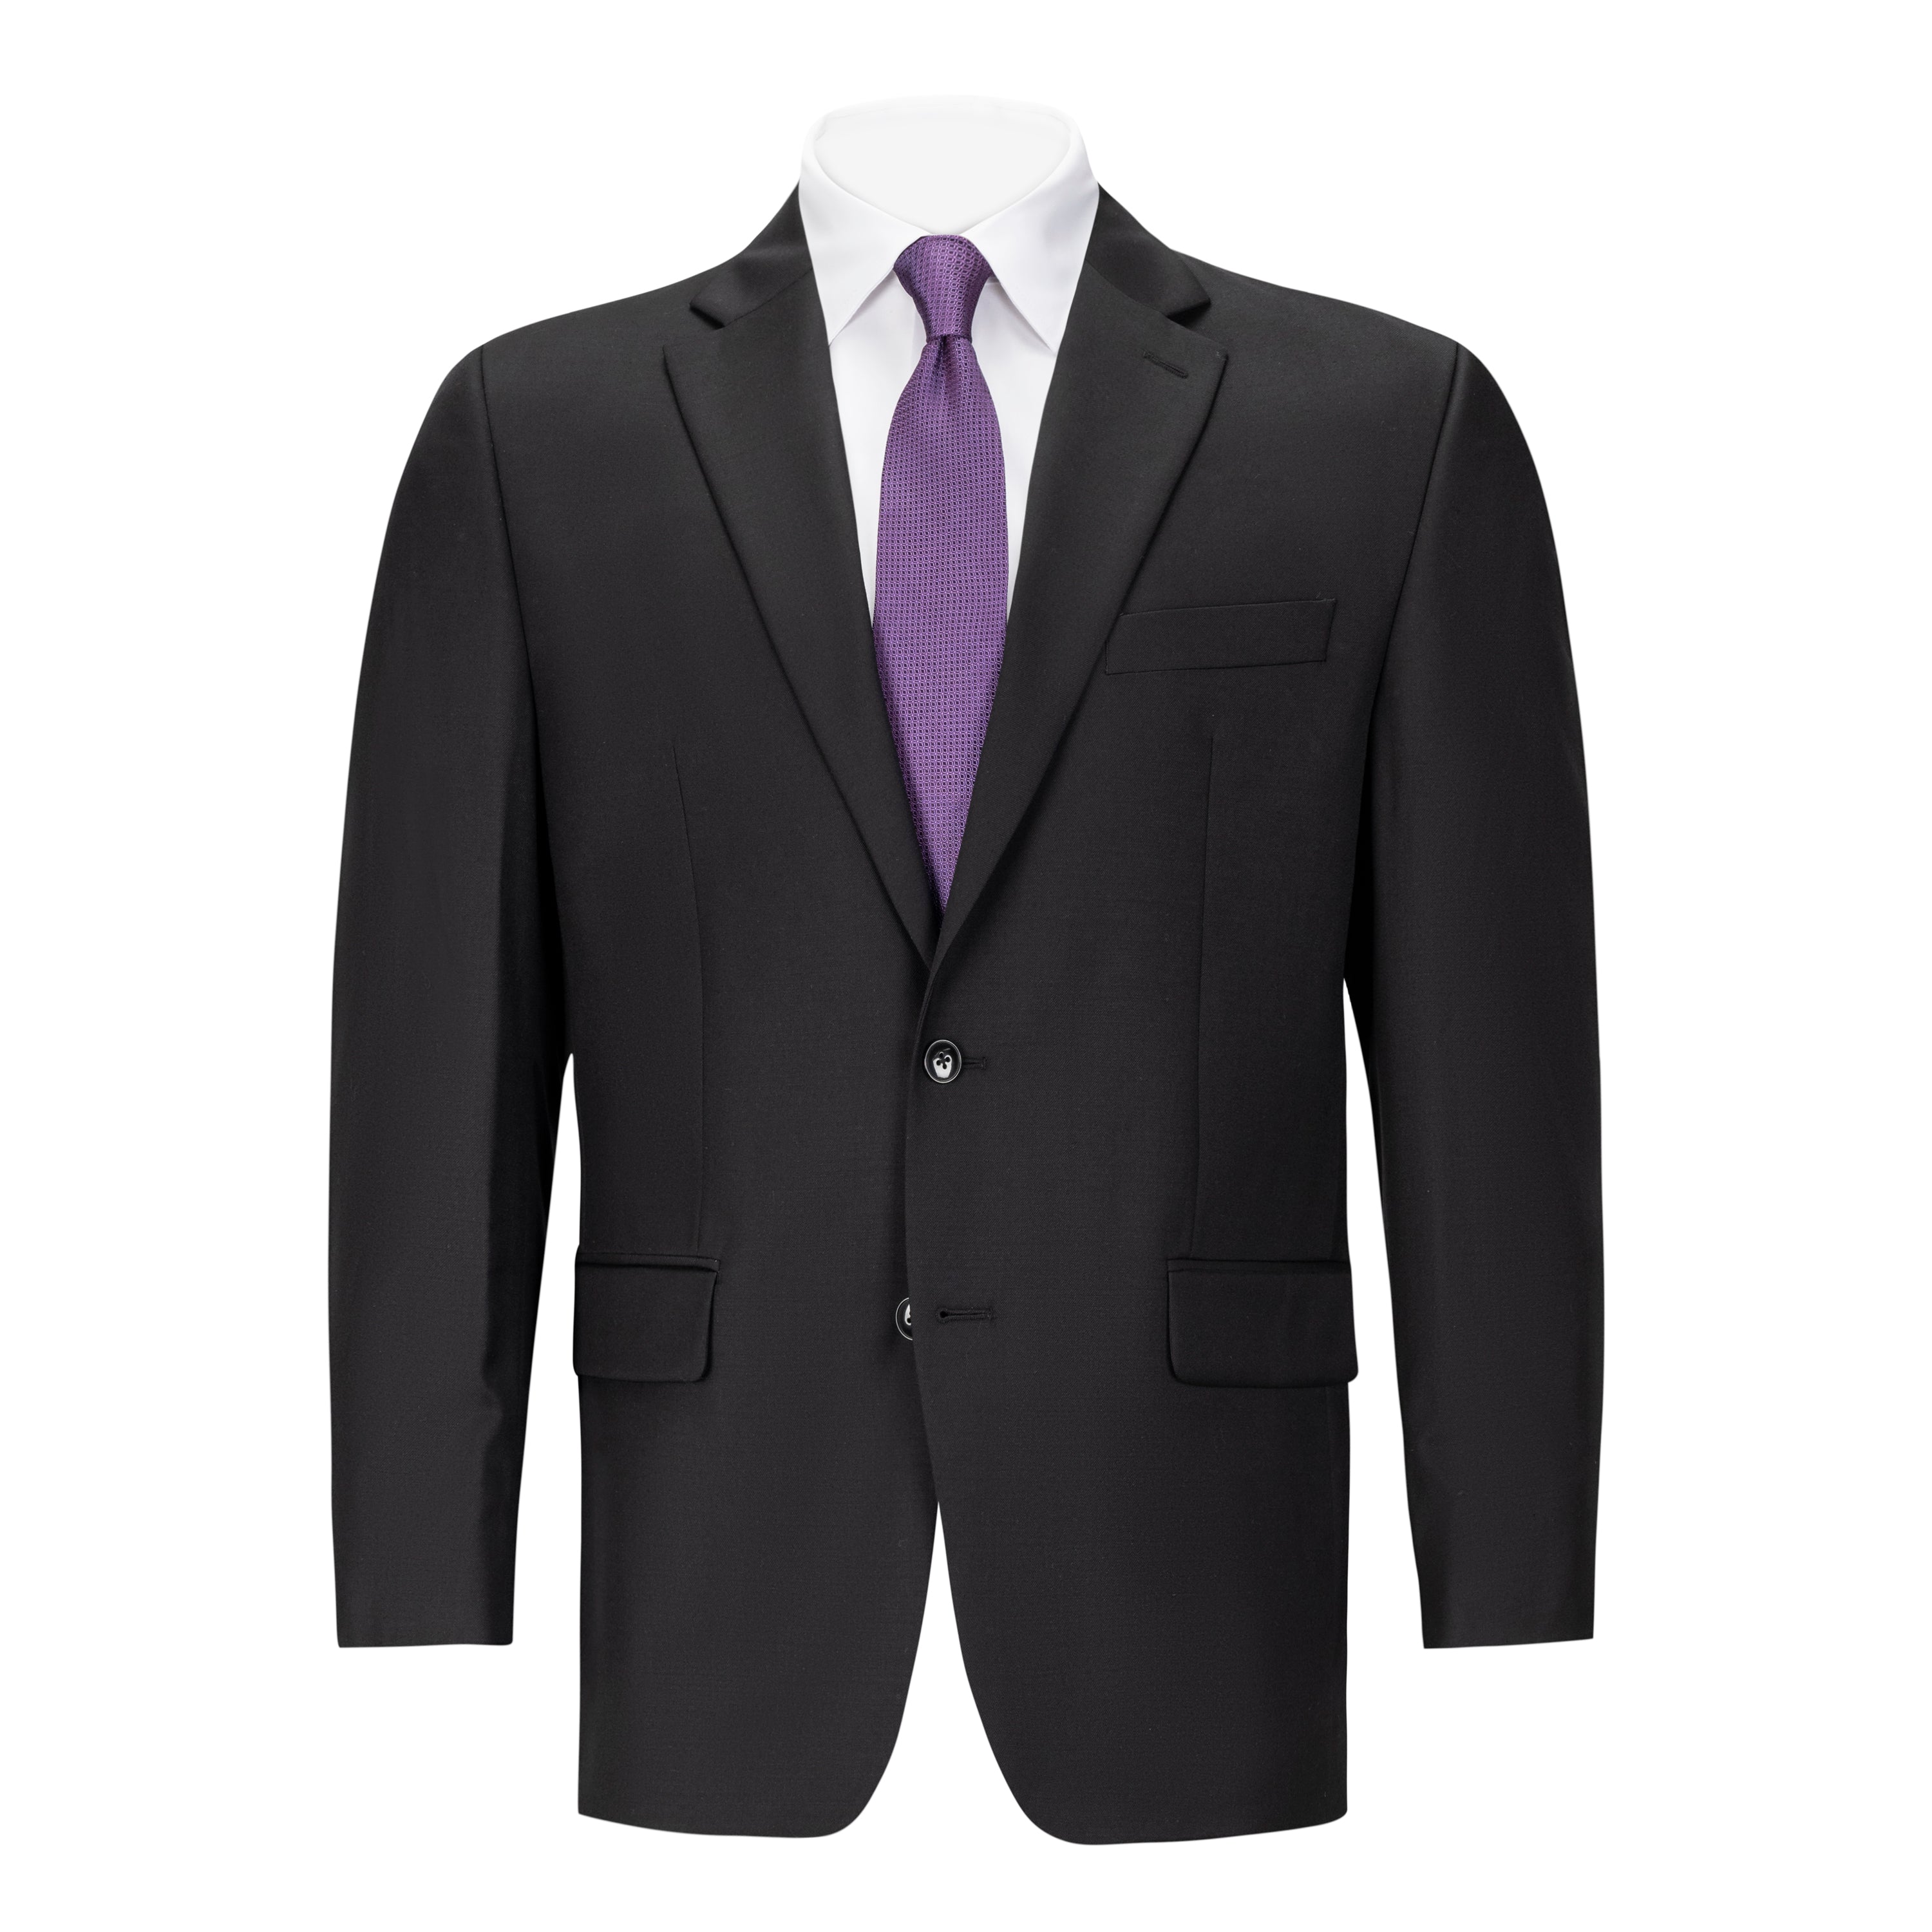 Formal Suits PNG Picture, Black Formal Suit Png And Psd, Black Suit, Suit,  Formal Suit PNG Image For Free Download